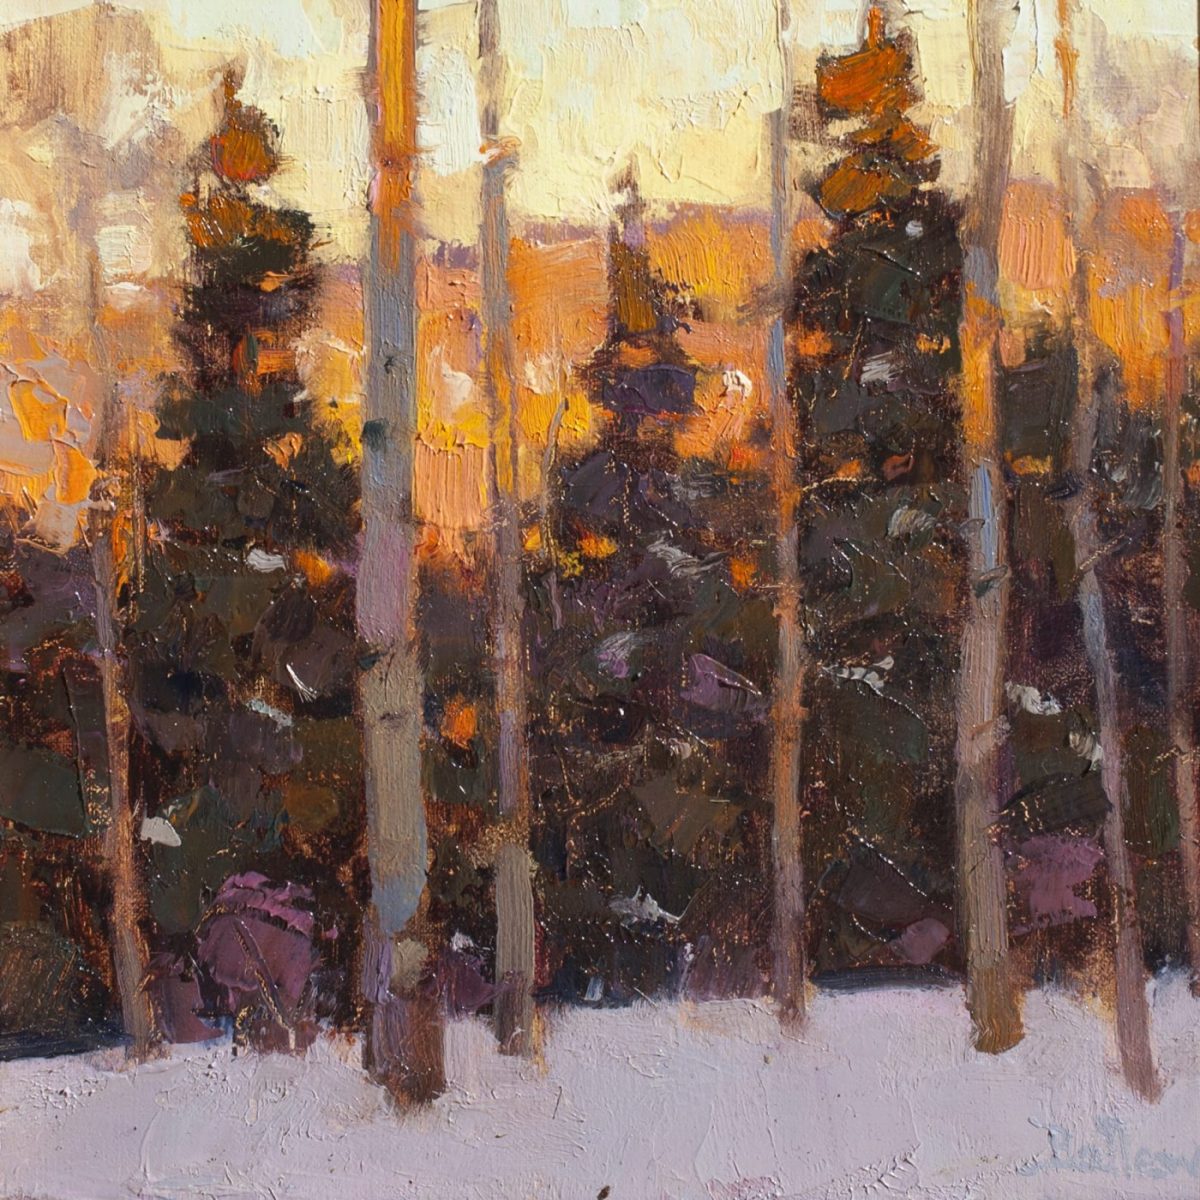 Alpenglow painting by artist David Ballew